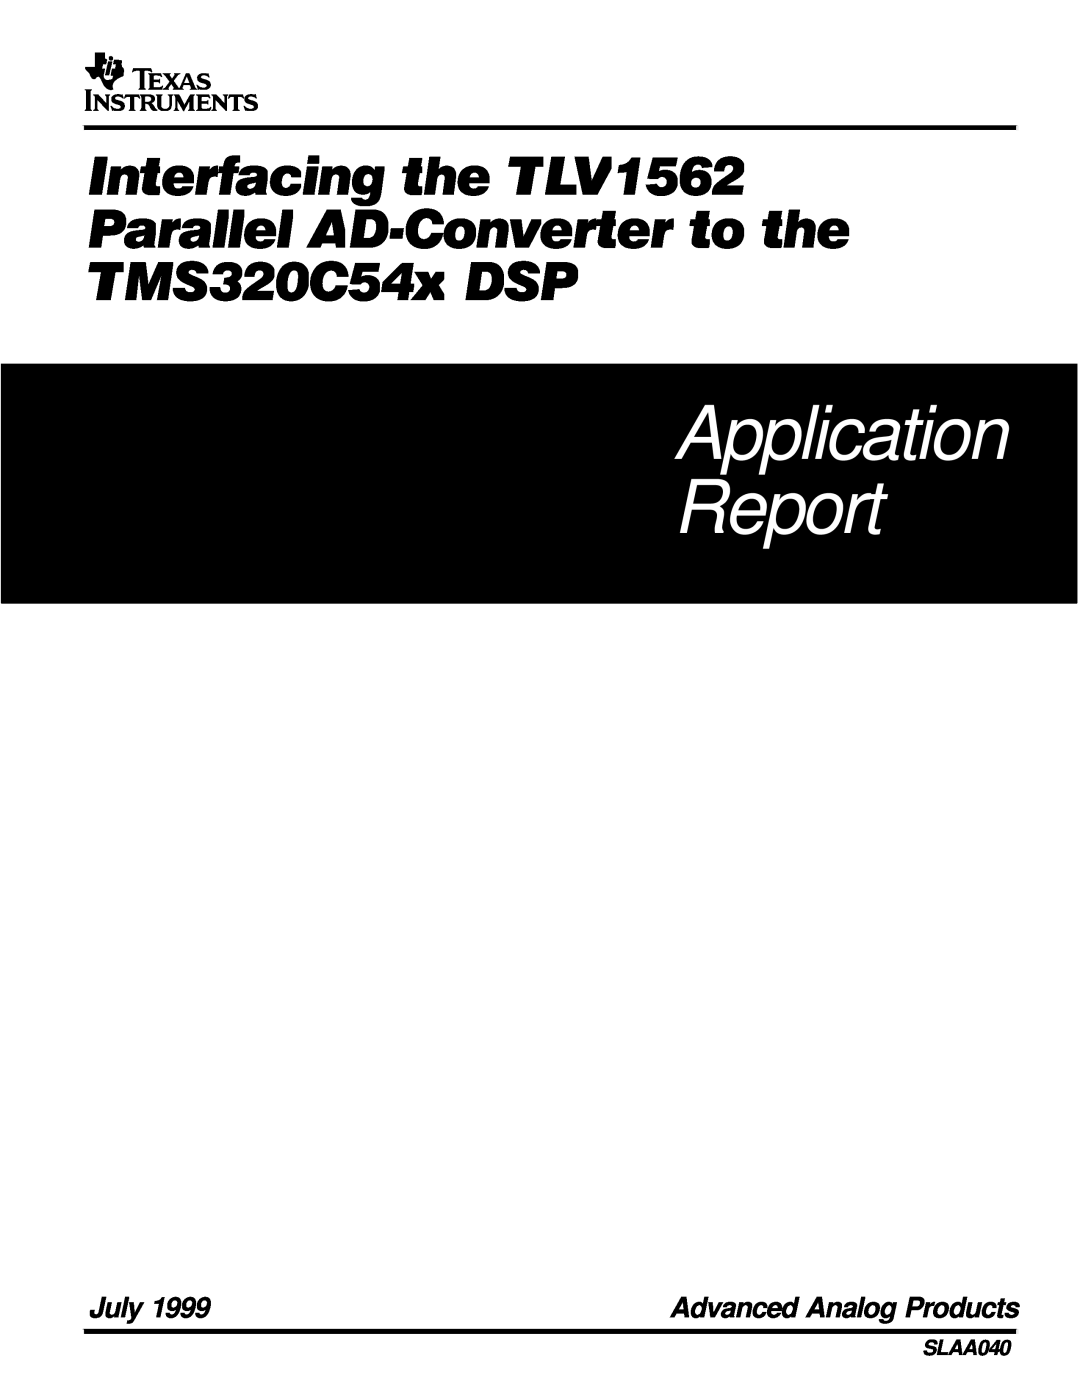 Texas Instruments TLV1562 manual July, SLAA040, Application Report, Advanced Analog Products 